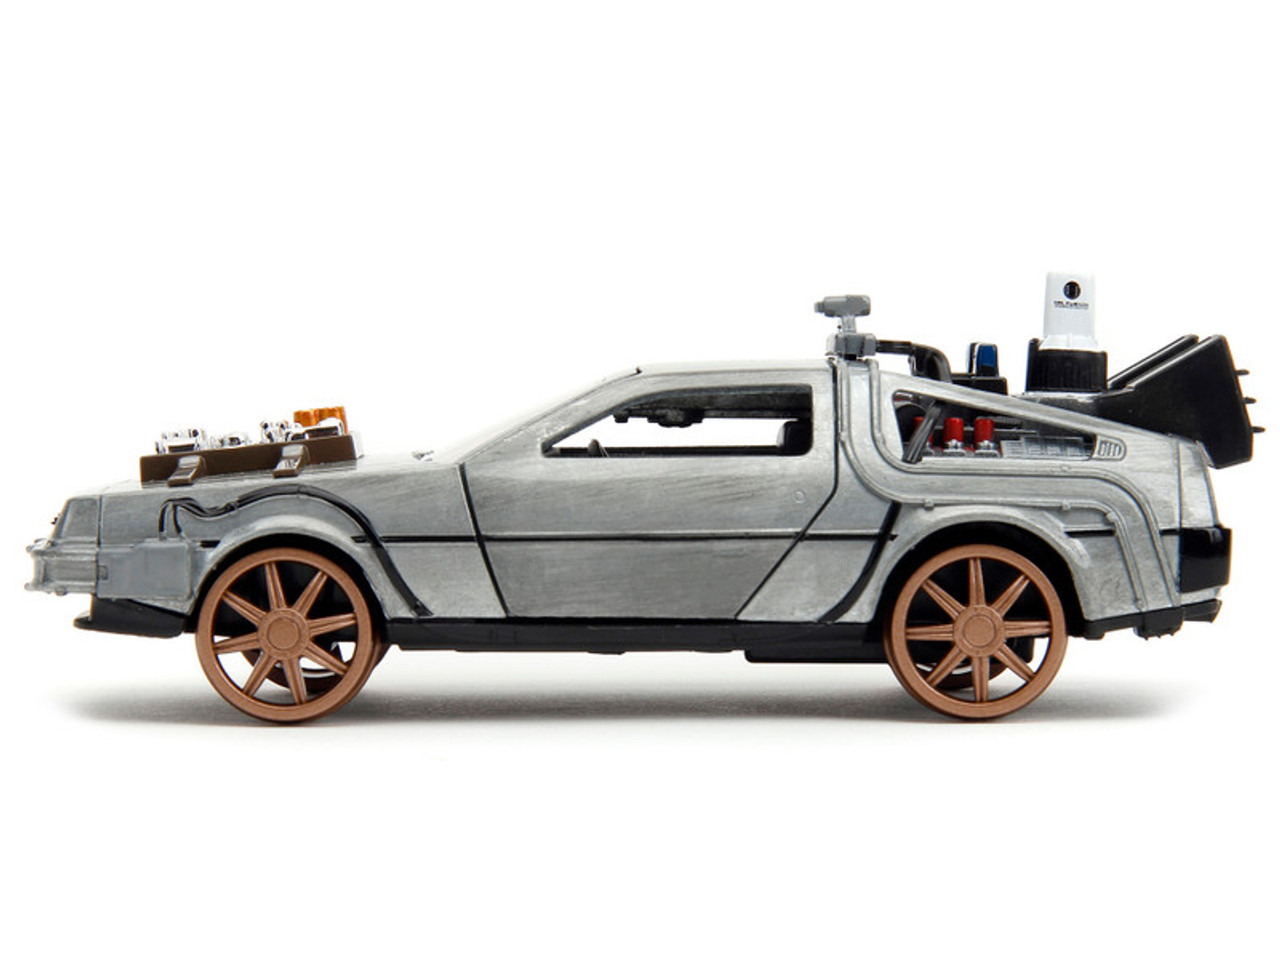 DeLorean DMC (Time Machine) Brushed Metal Train Wheel Version "Back to the Future Part III" (1990) Movie "Hollywood Rides" Series 1/32 Diecast Model Car by Jada